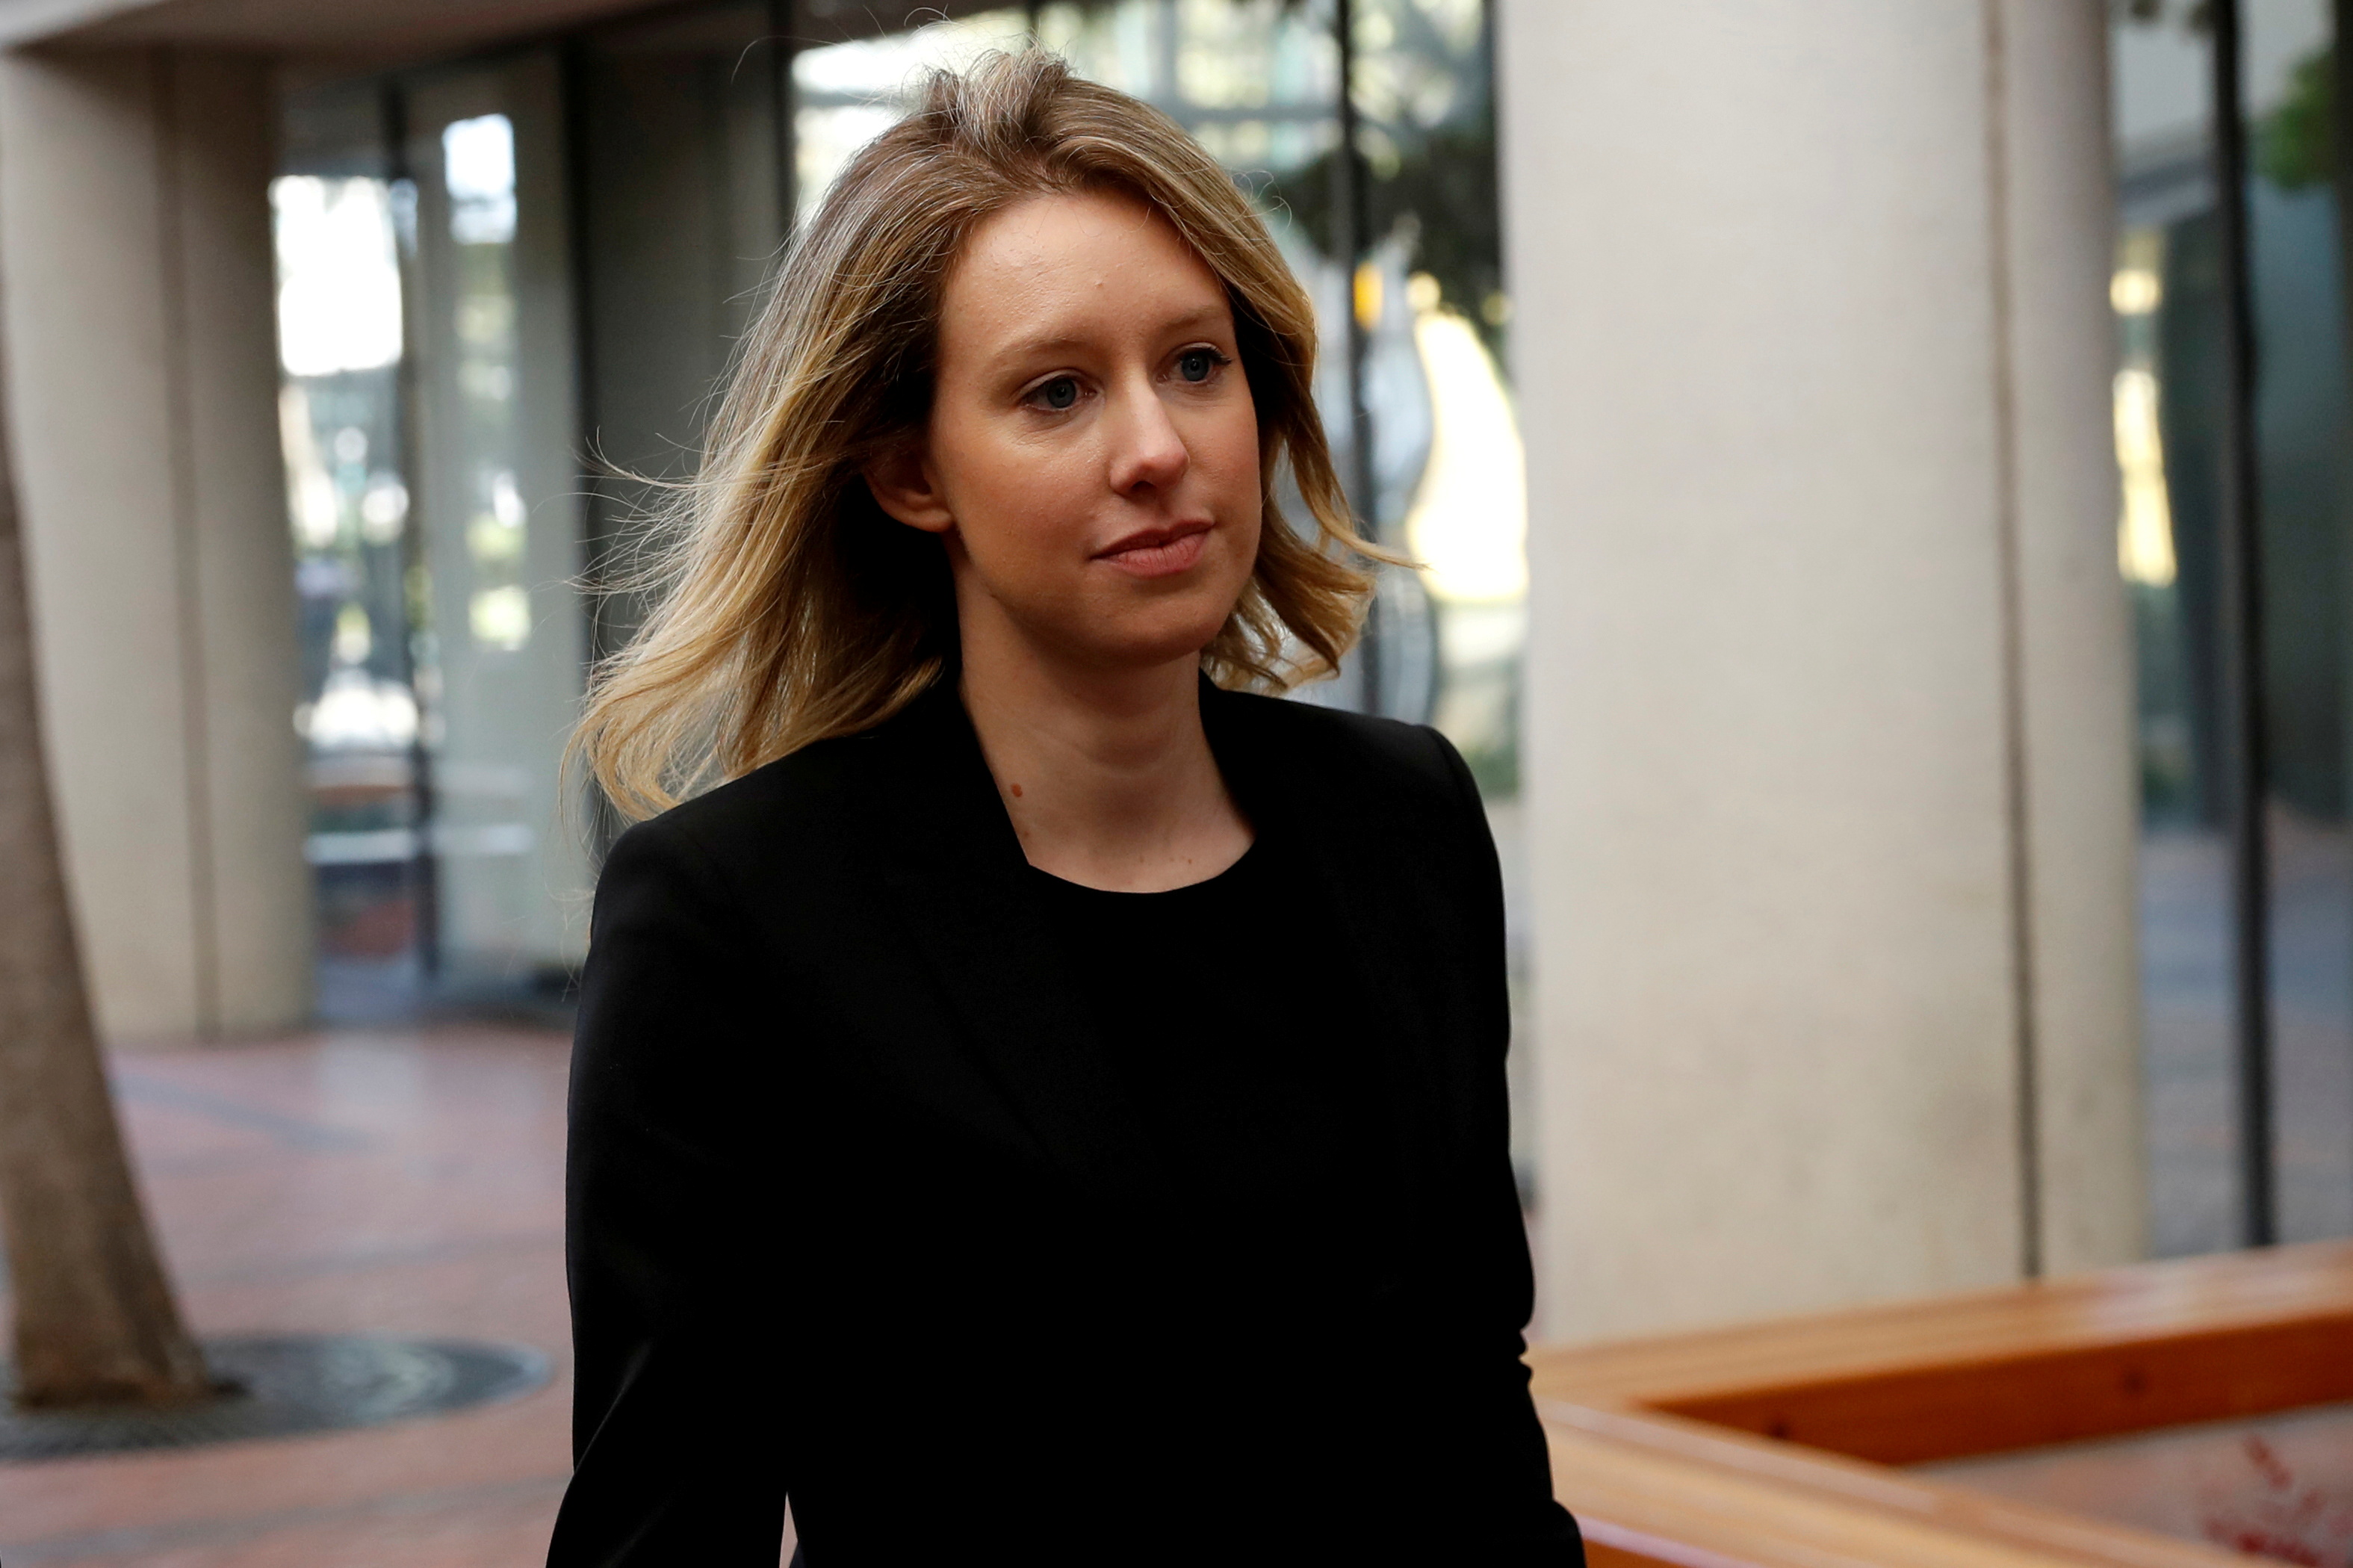 Former Theranos CEO Elizabeth Holmes arrives for a hearing at a federal court in San Jose